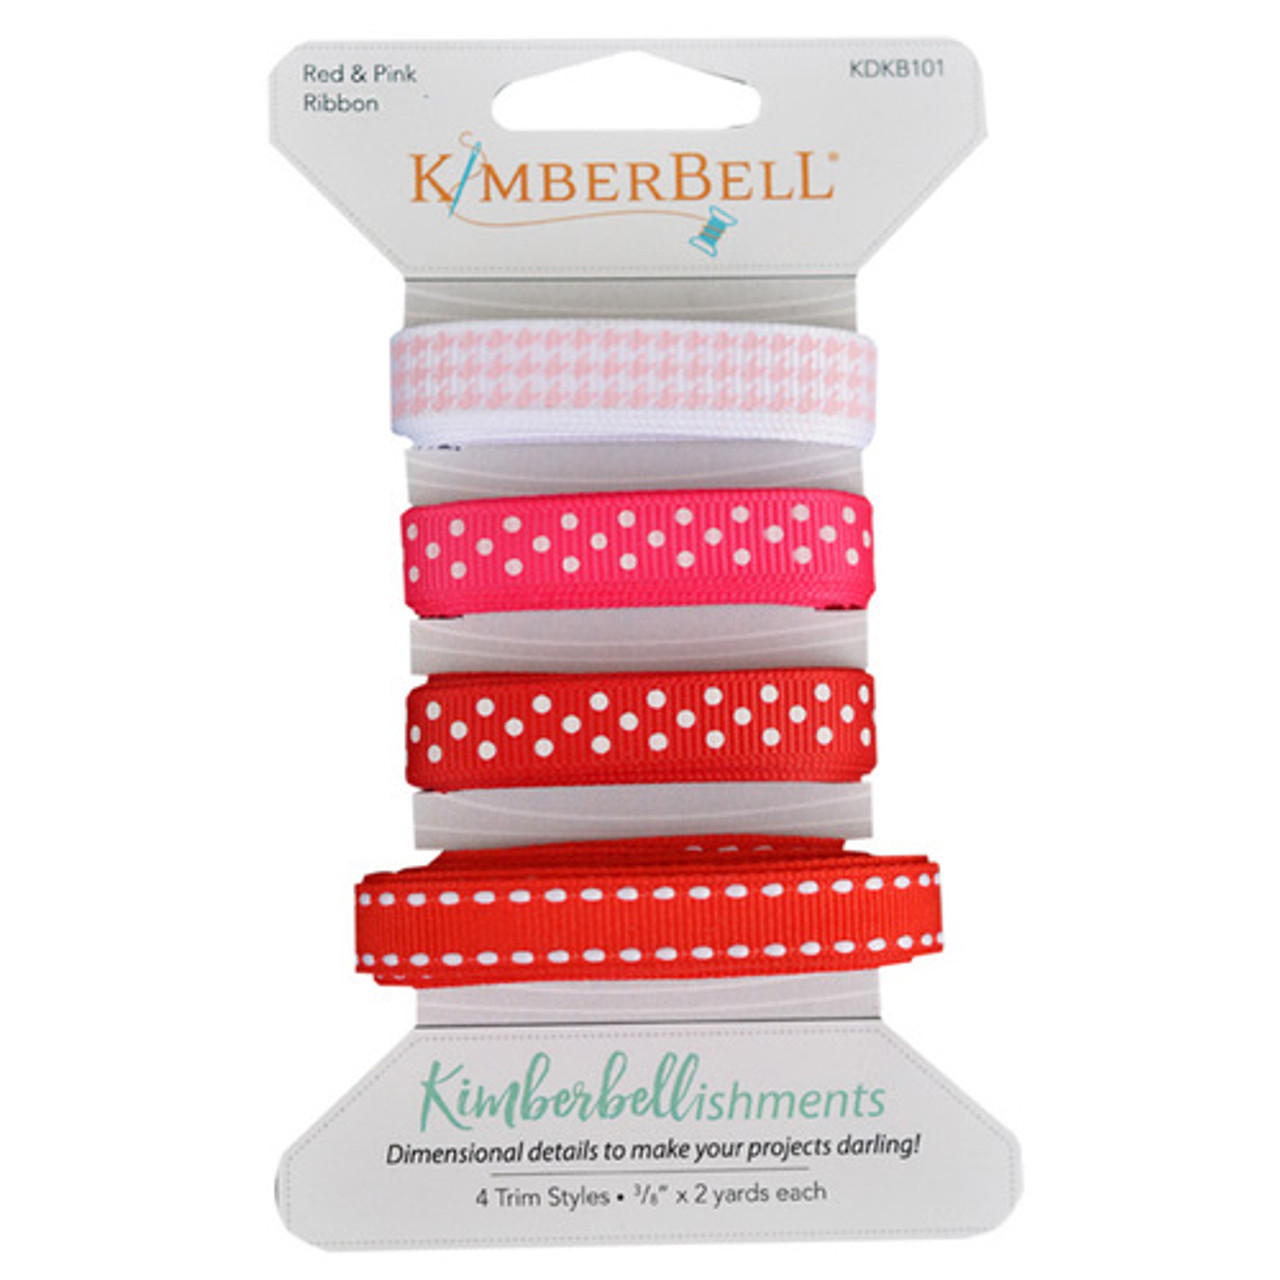 Kimberbell Red and Pink Ribbons